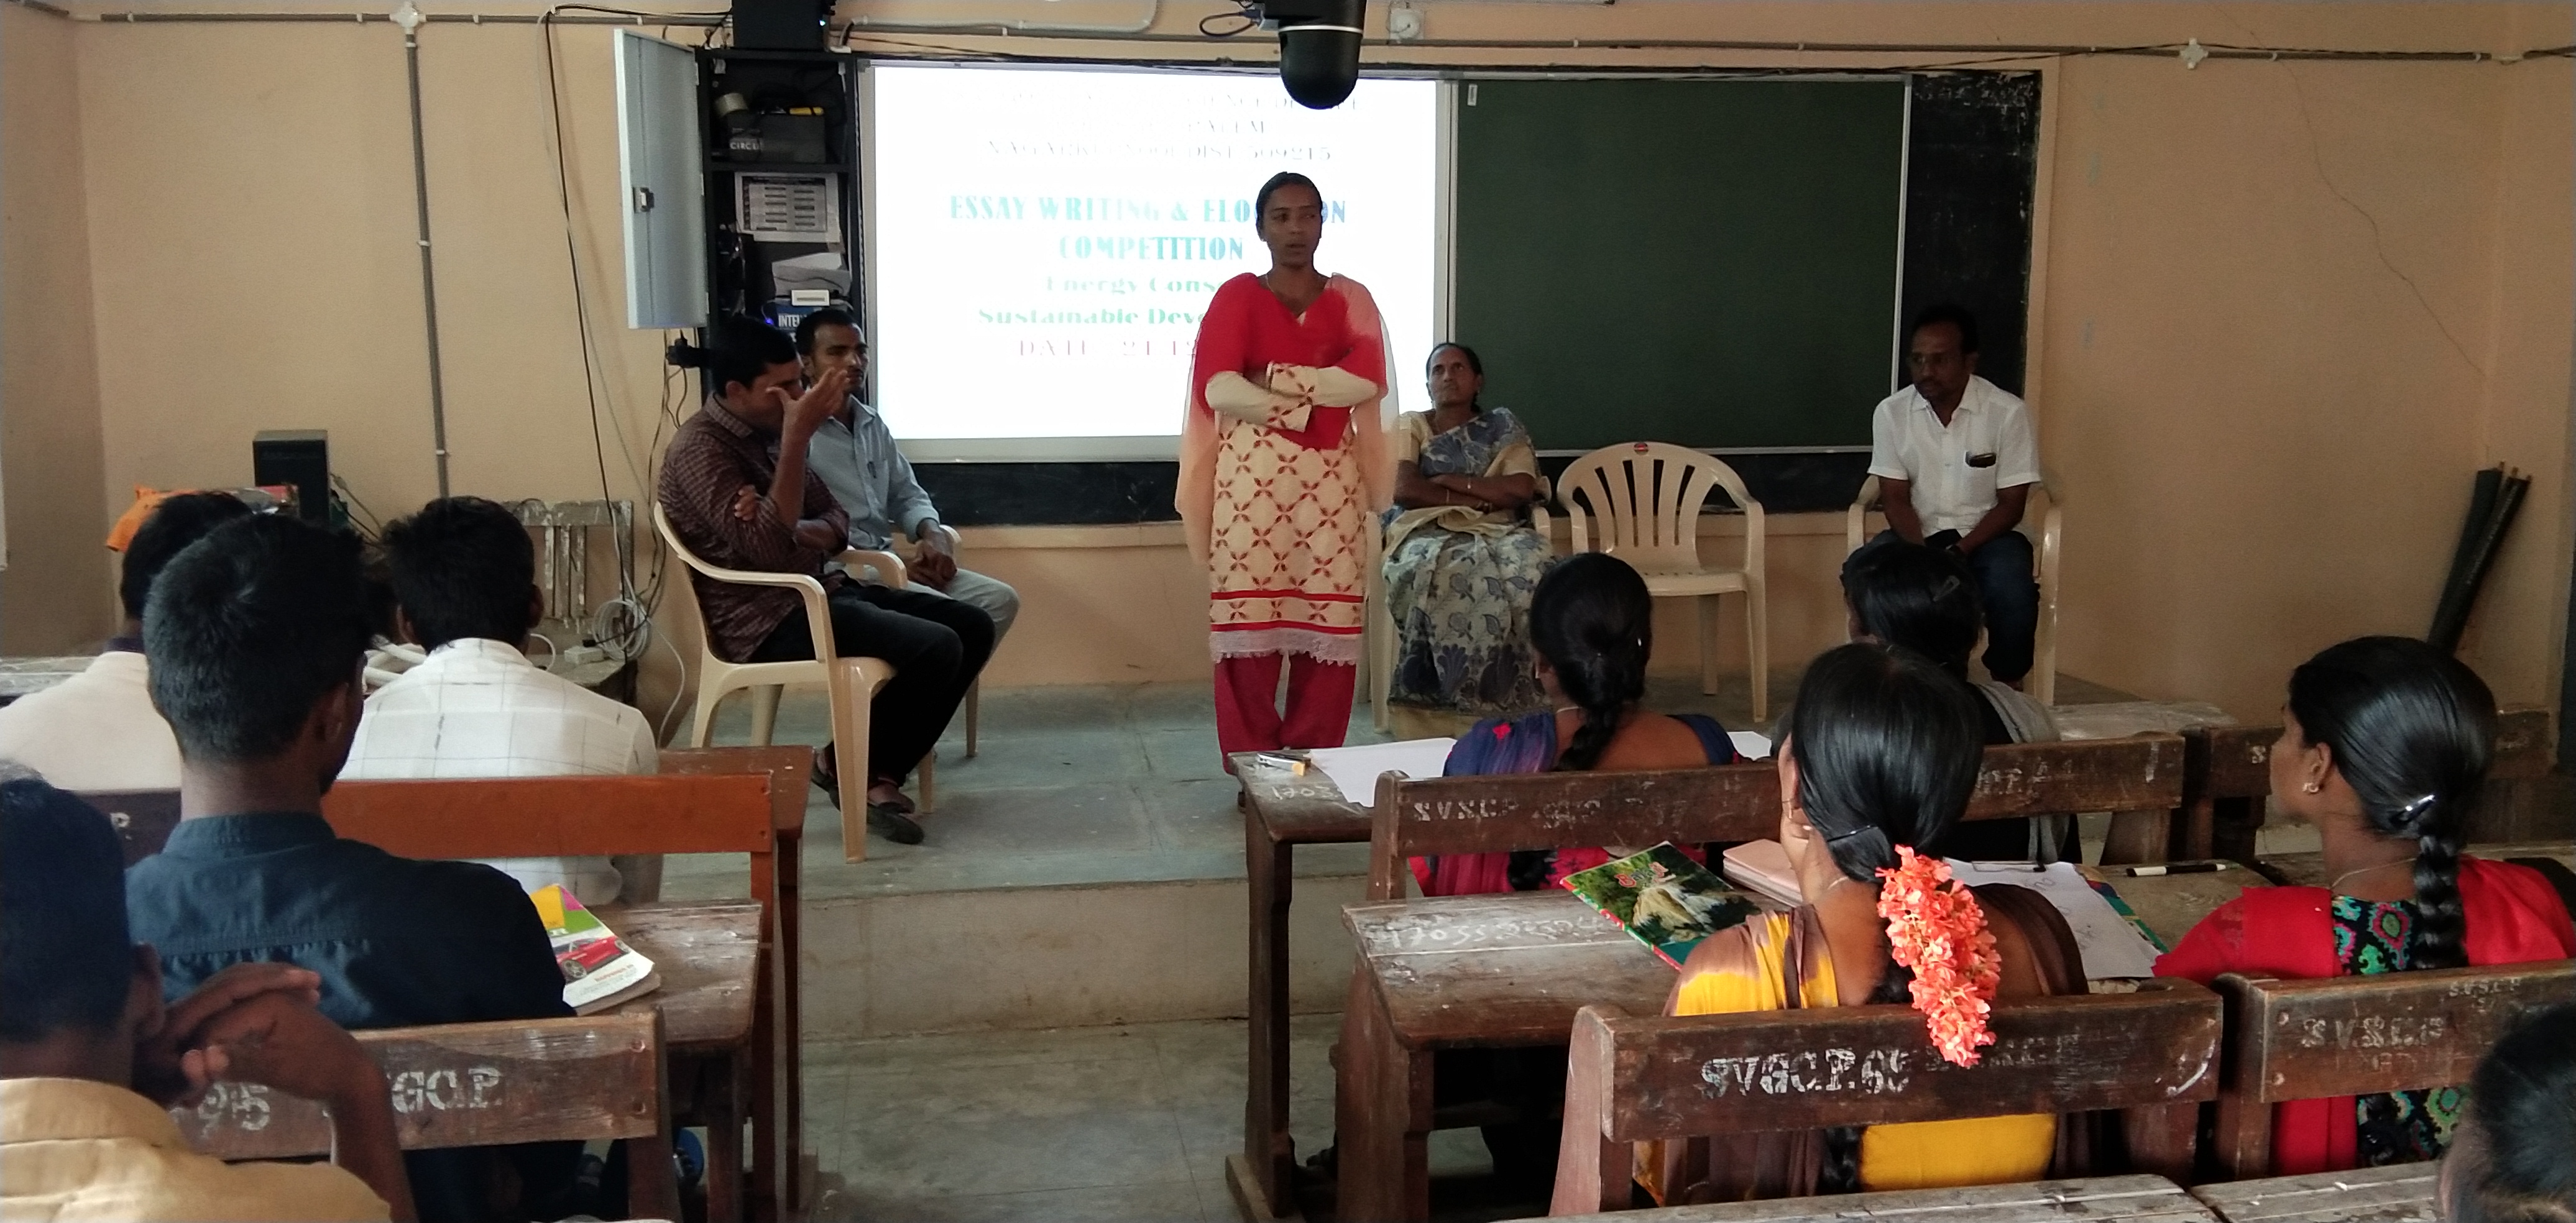 Energy conservation sustainable development program conducted and presided over by Principal , A. Shivaleela